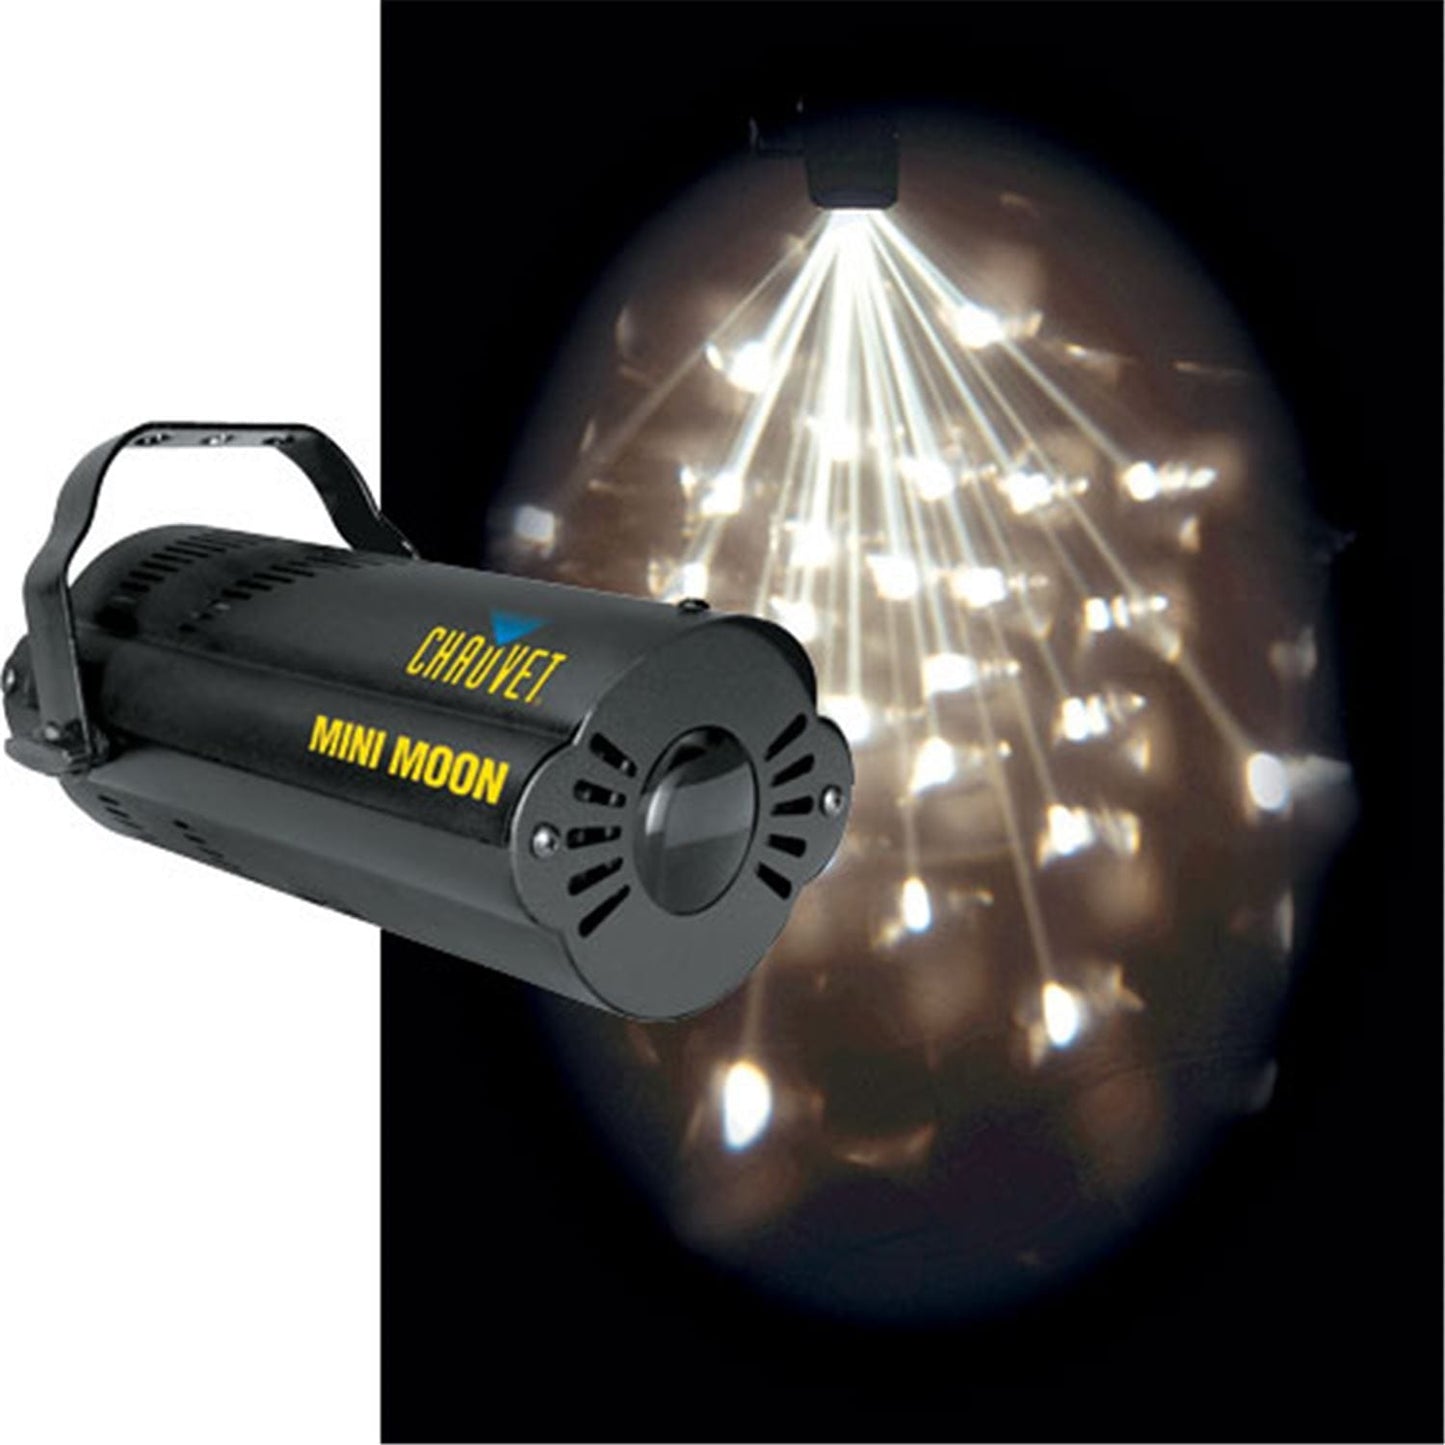 Chauvet CH202B Mini Moon Effects Light (BRL) - ProSound and Stage Lighting